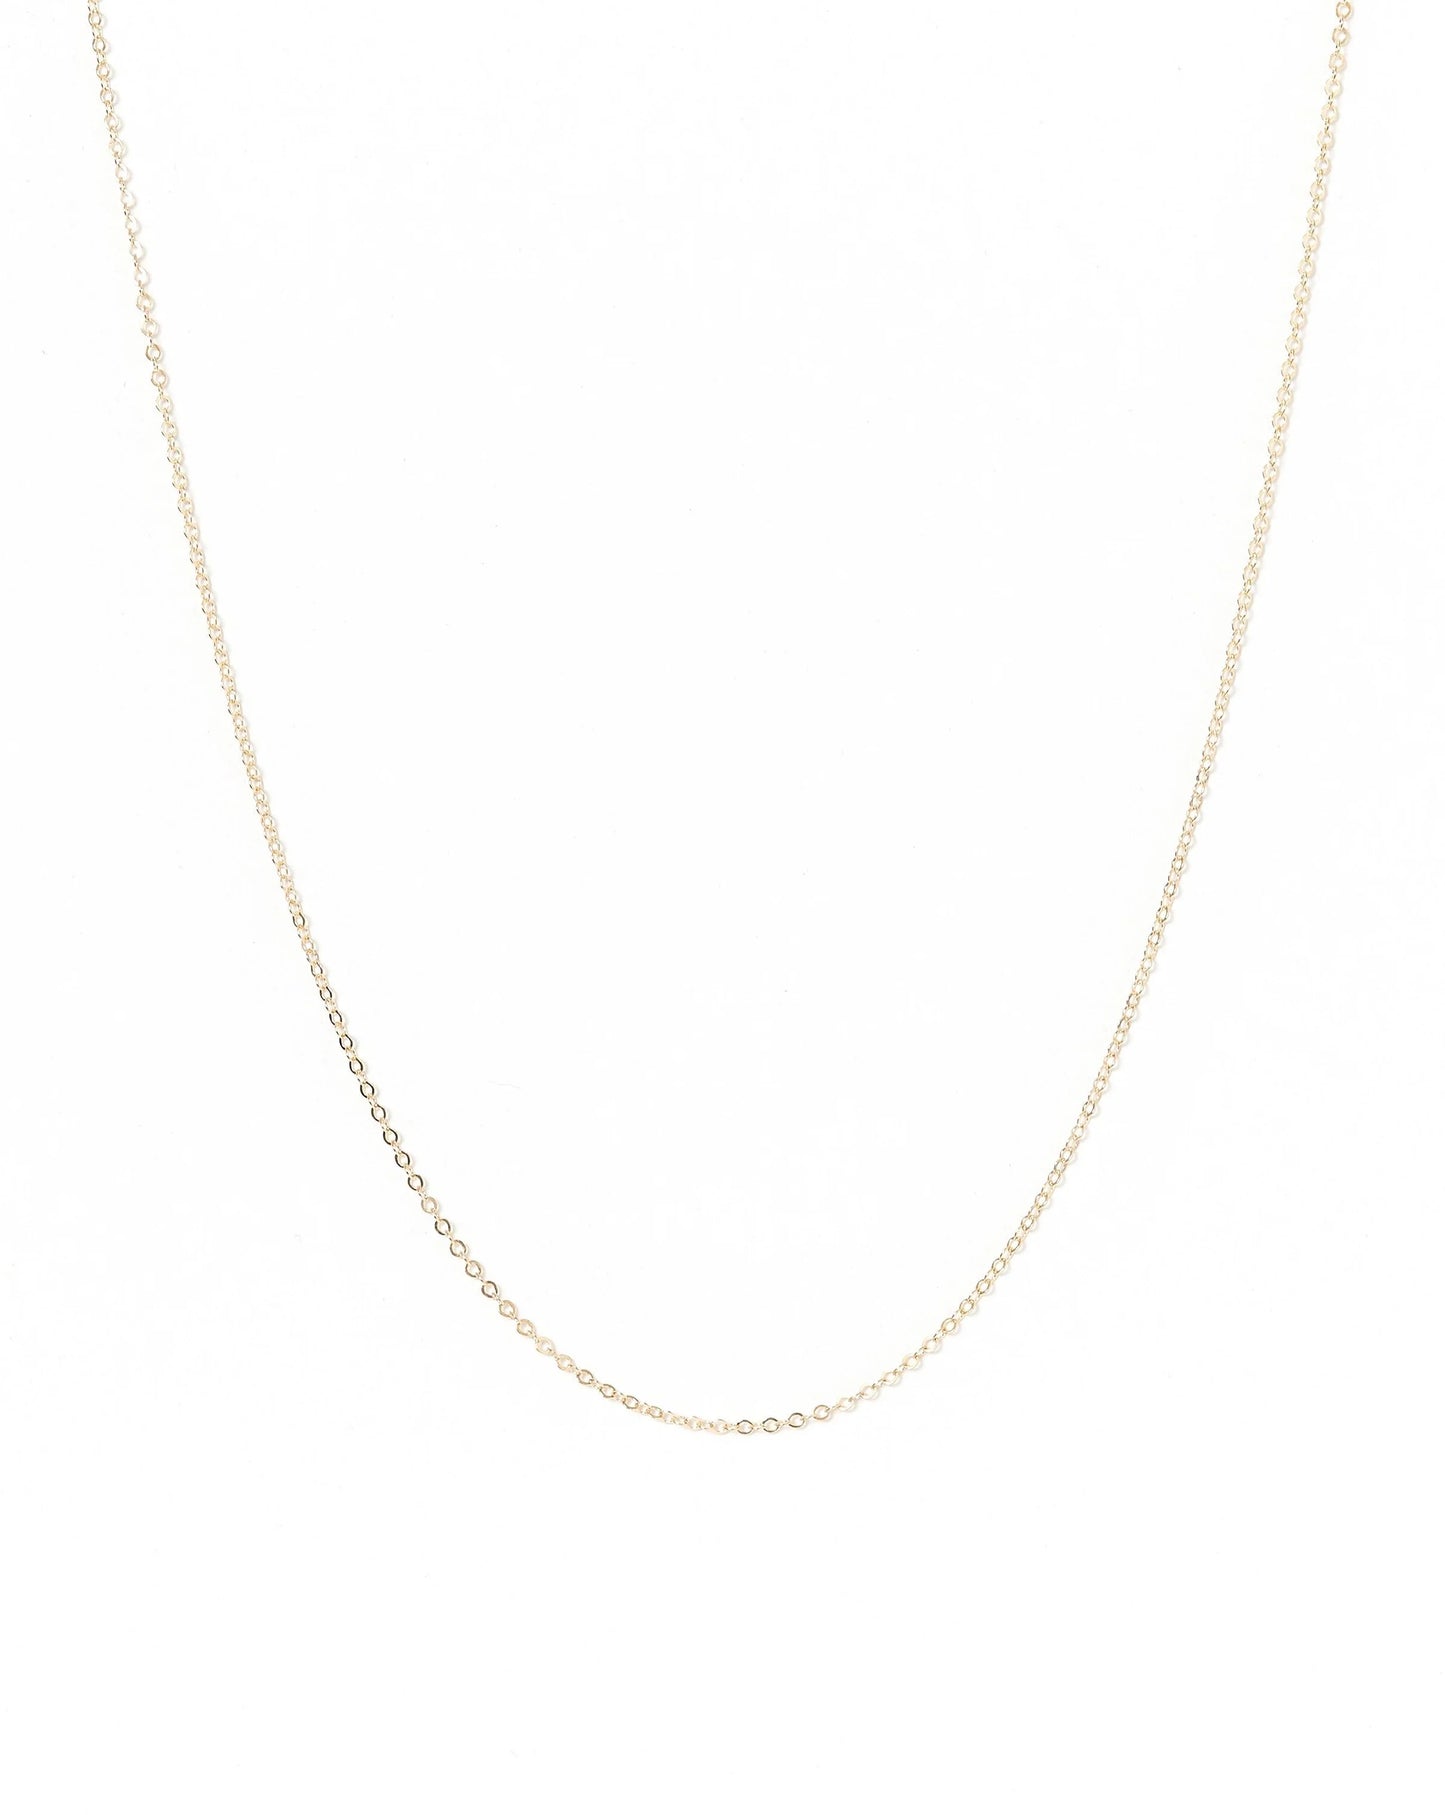 One Love Chain (Gold)